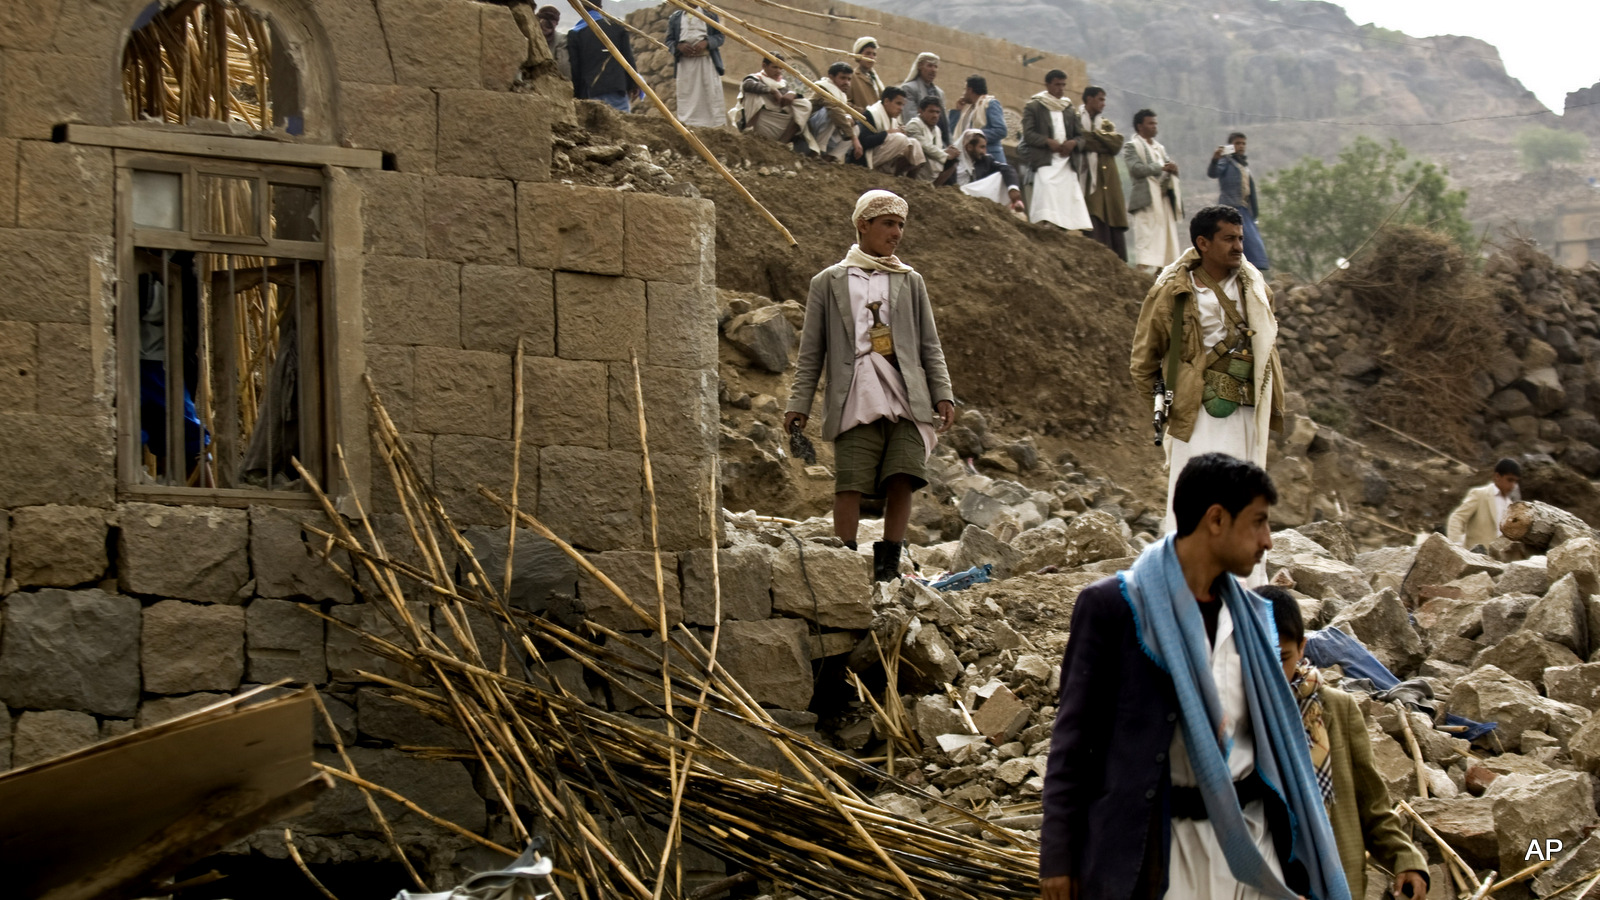 Yemenis stand amid the rubble of houses destroyed by Saudi-led airstrikes in a village near Sanaa, Yemen.